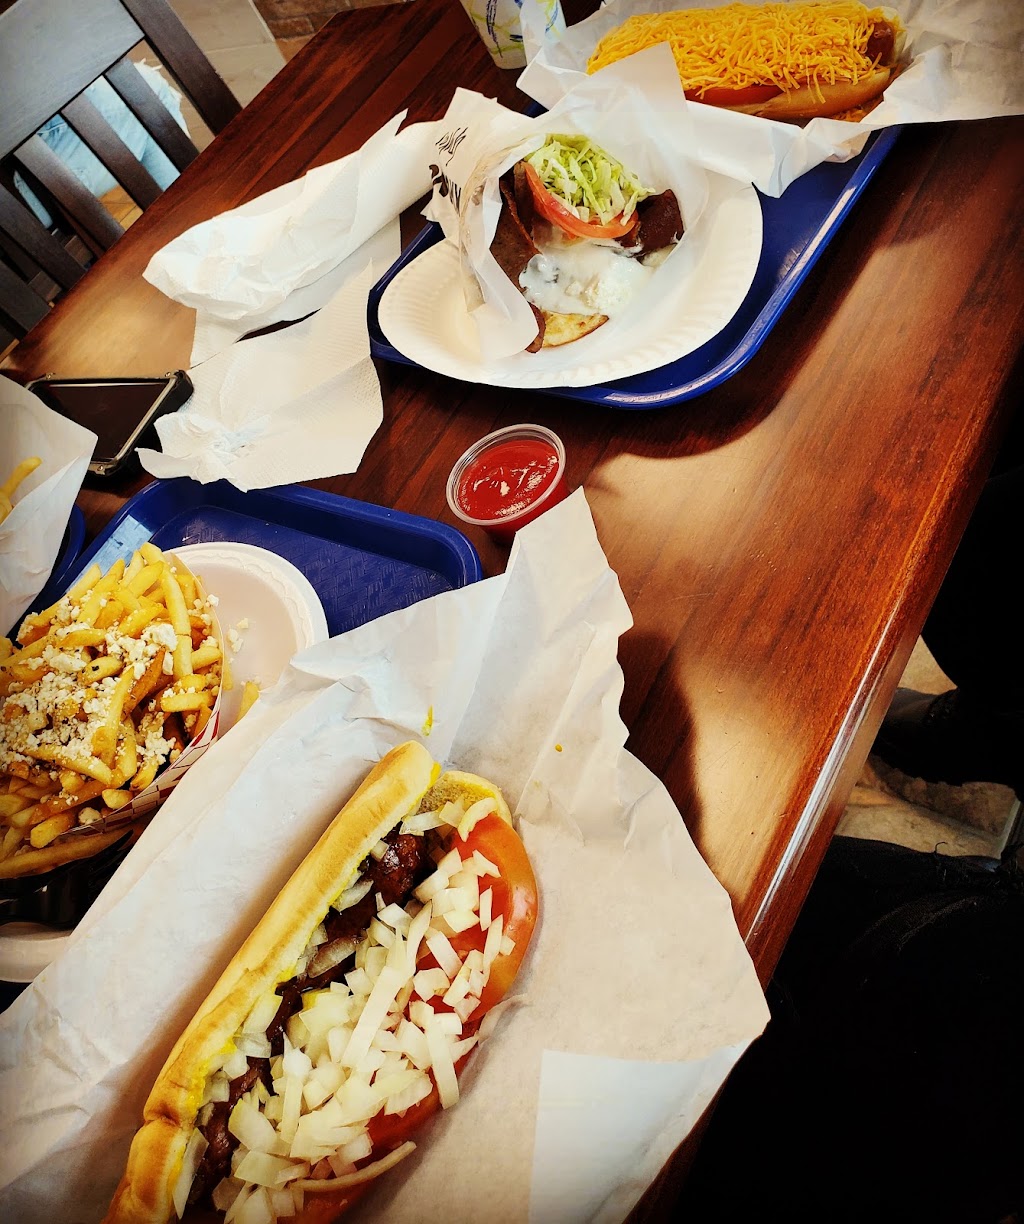 Jerrys Hot Dogs | 380 W Country Club Dr unit i, Brentwood, CA 94513 | Phone: (925) 754-4313